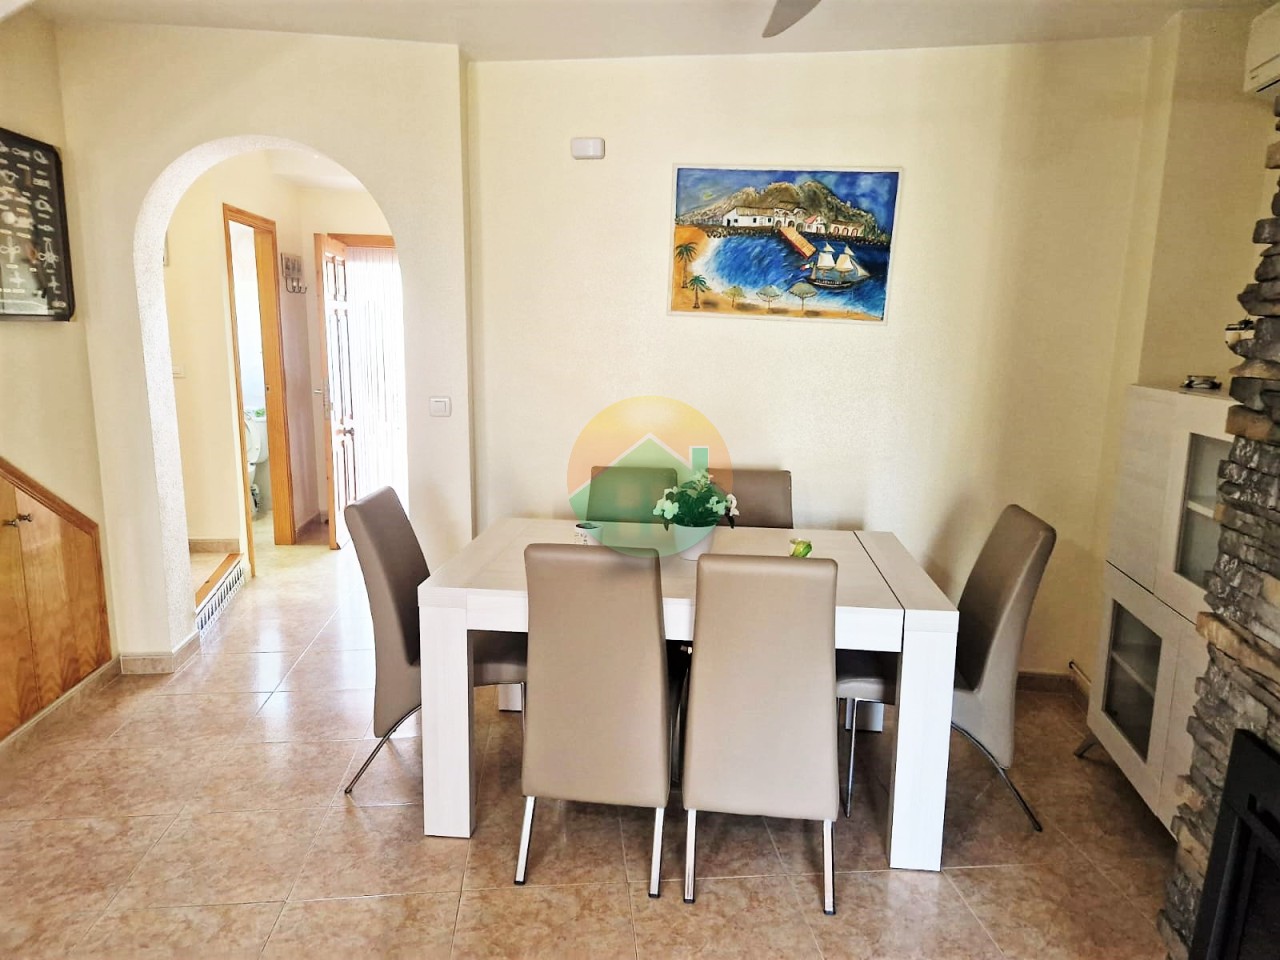 3 bedroom Terraced For sale in Aguilas